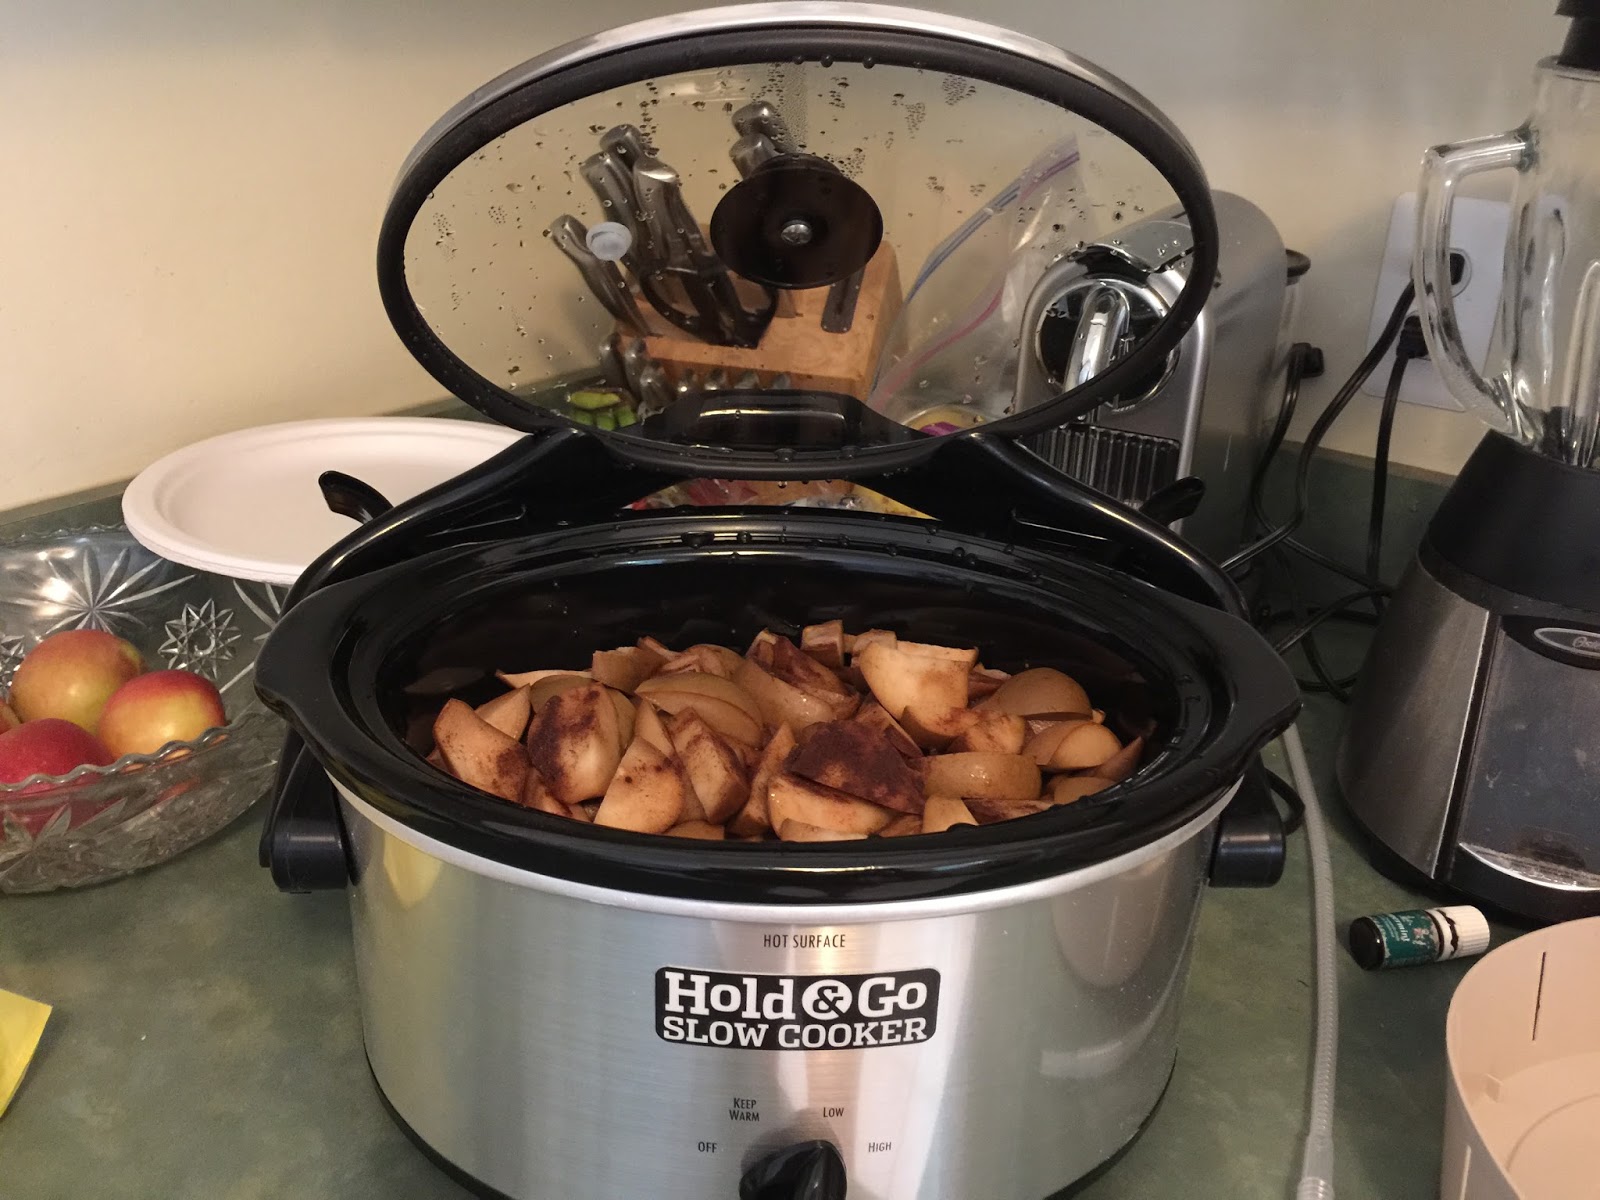 How To Clean Your Slow Cooker